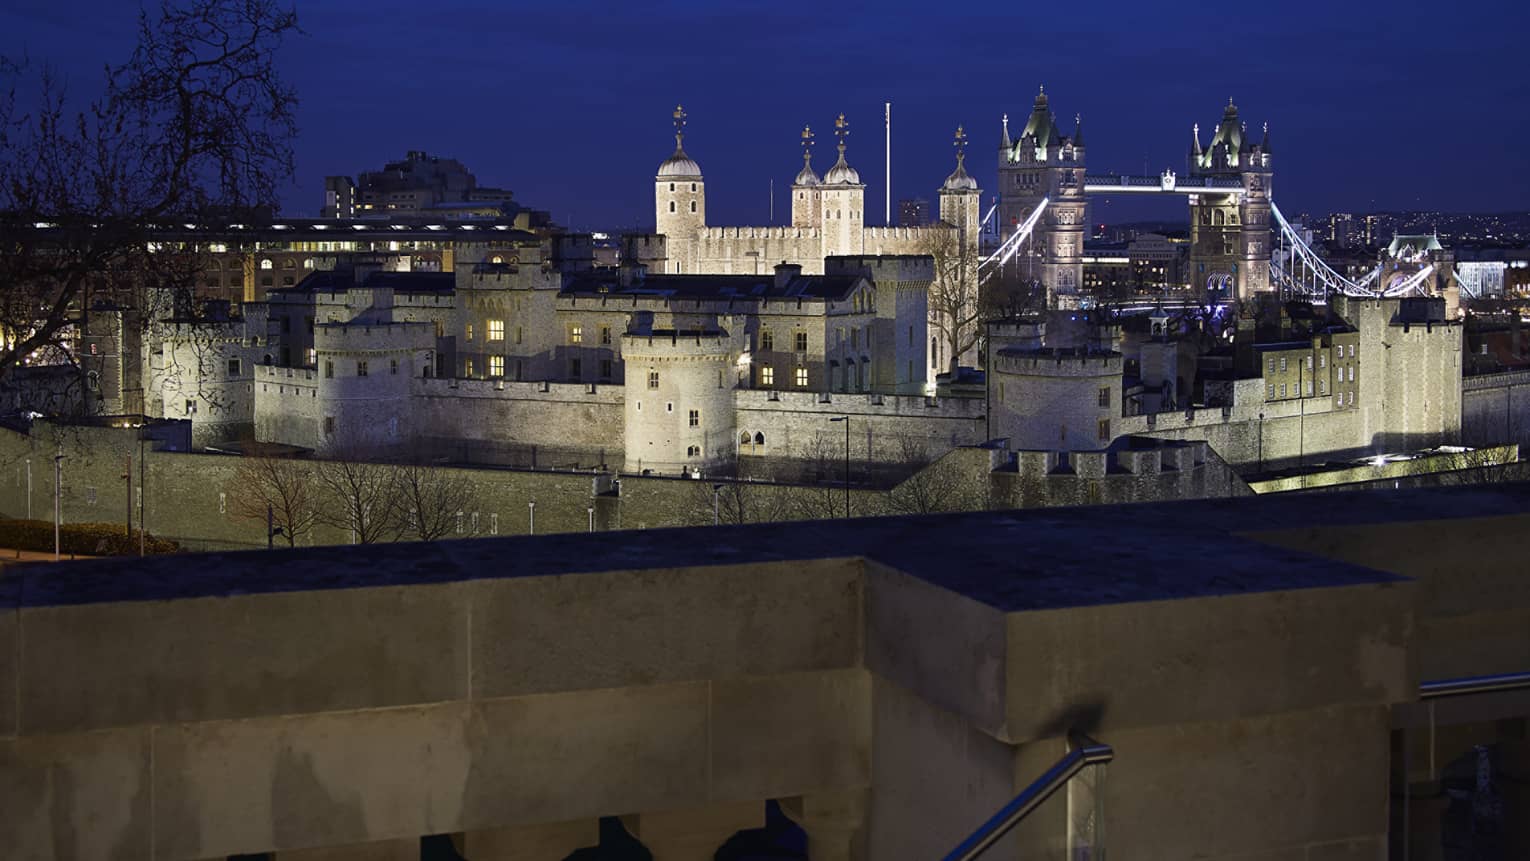 View over wall to Tower Bridge and the Tower of London at night